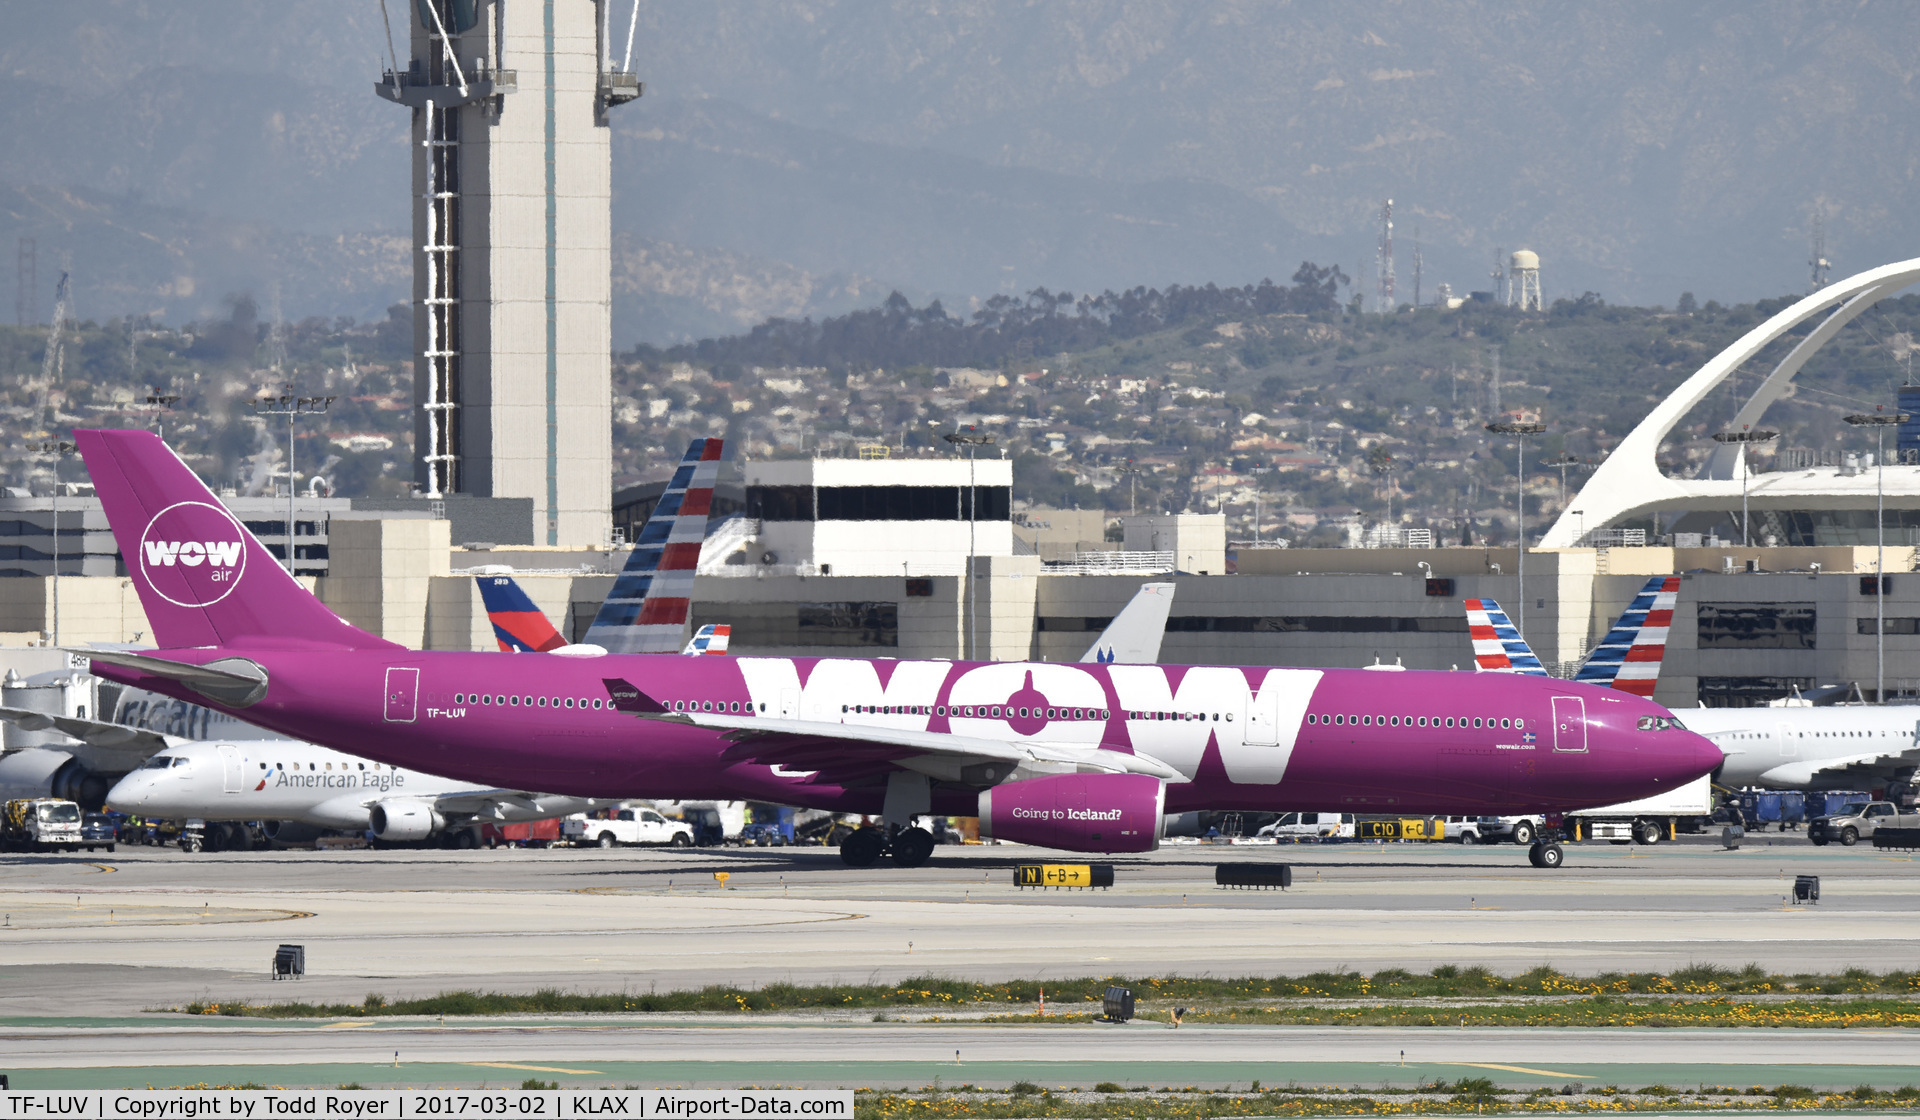 TF-LUV, 2015 Airbus A330-343 C/N 1607, Taxiing for departure at LAX